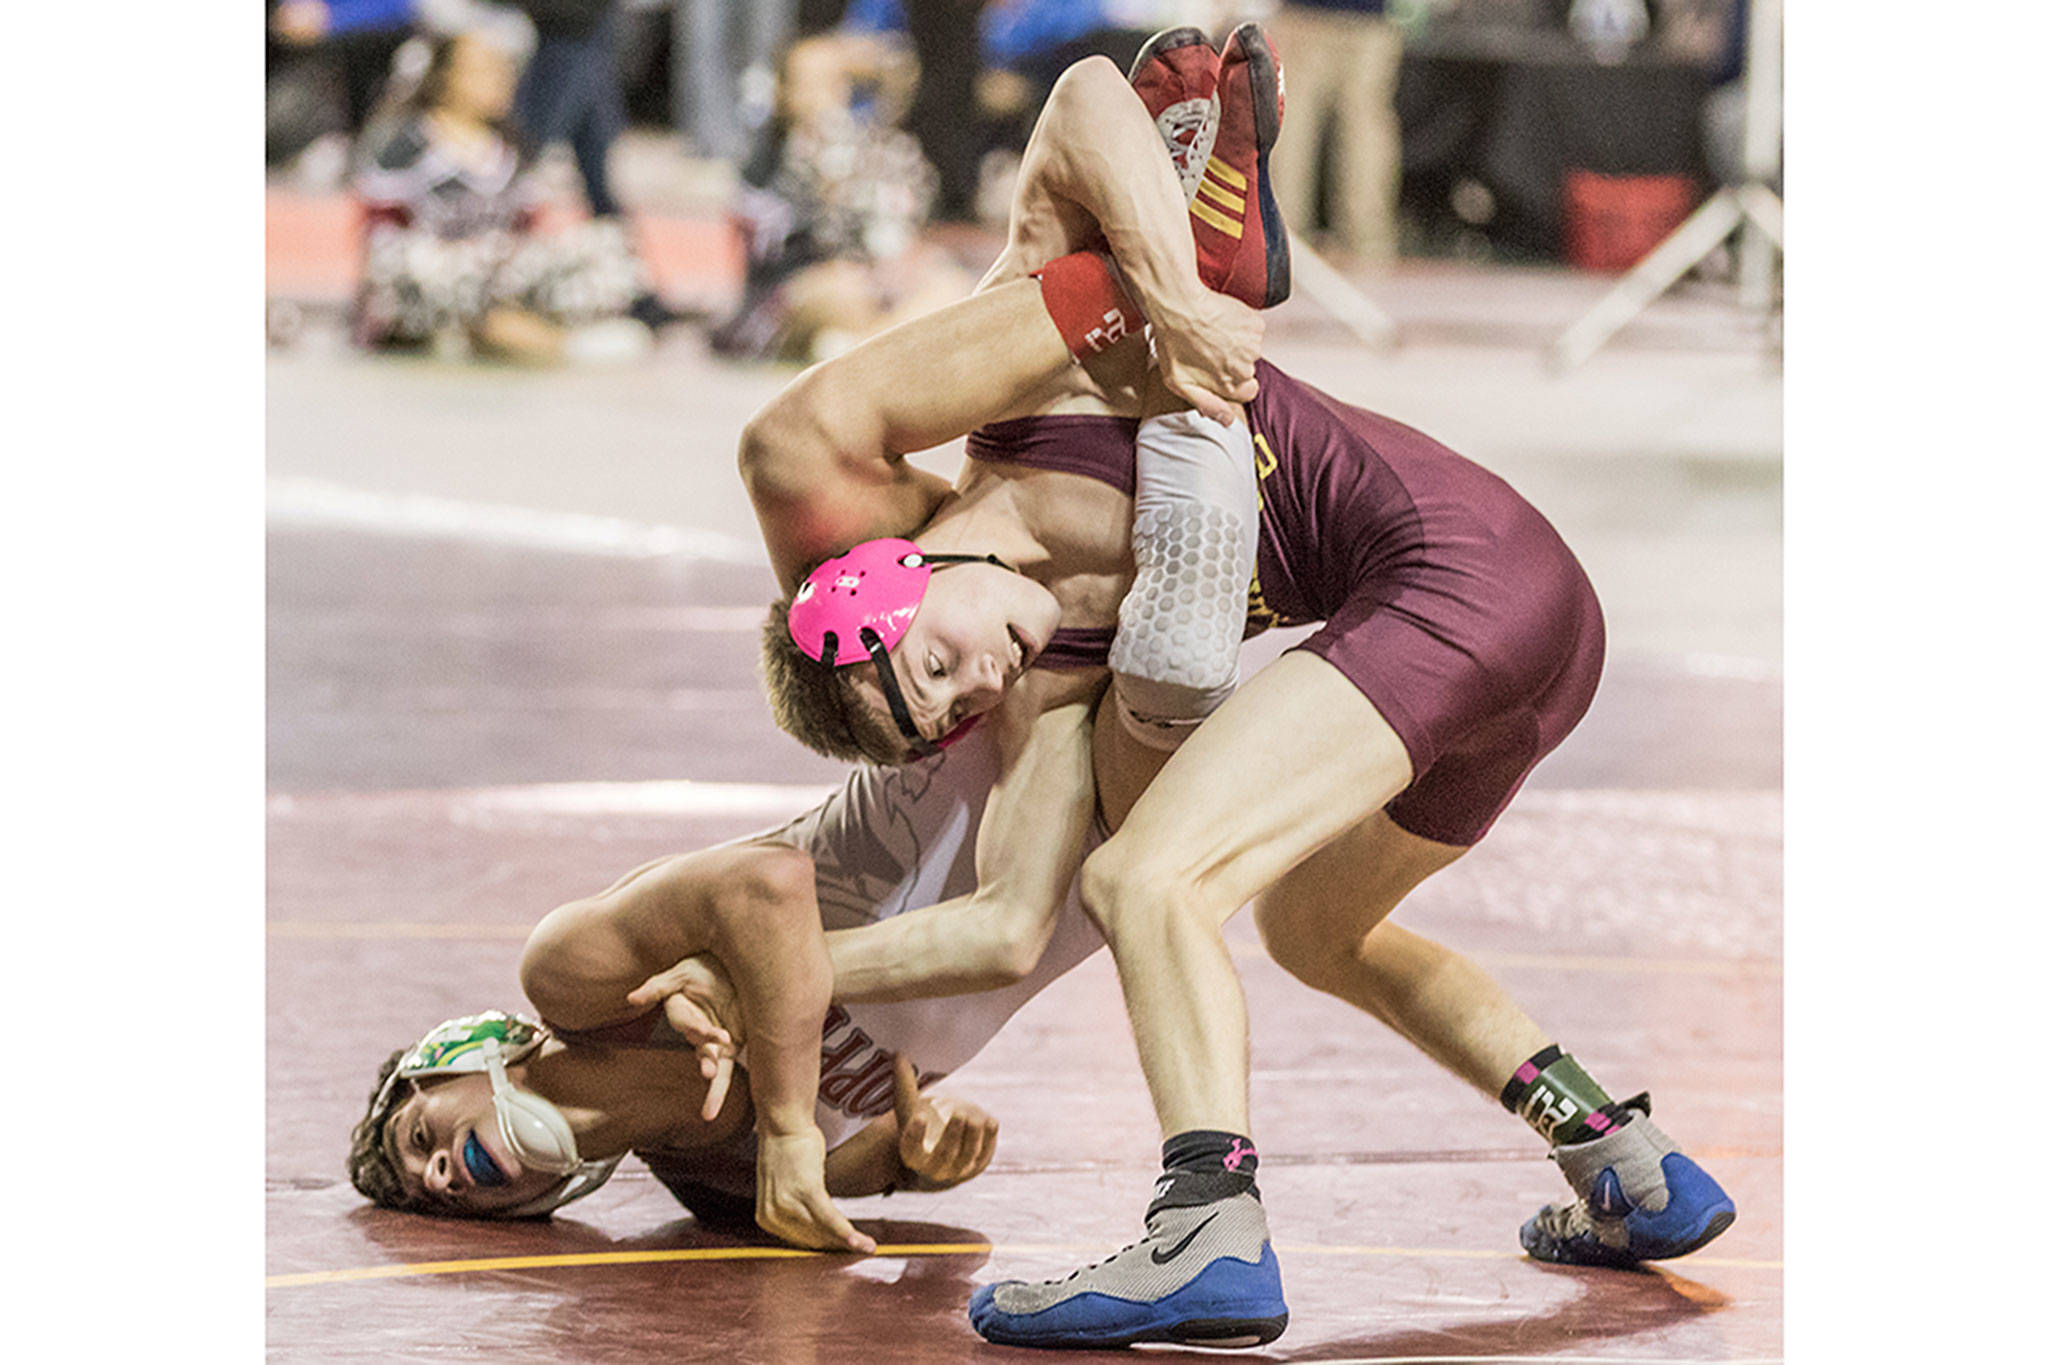 7 of 17 local wrestlers place at state